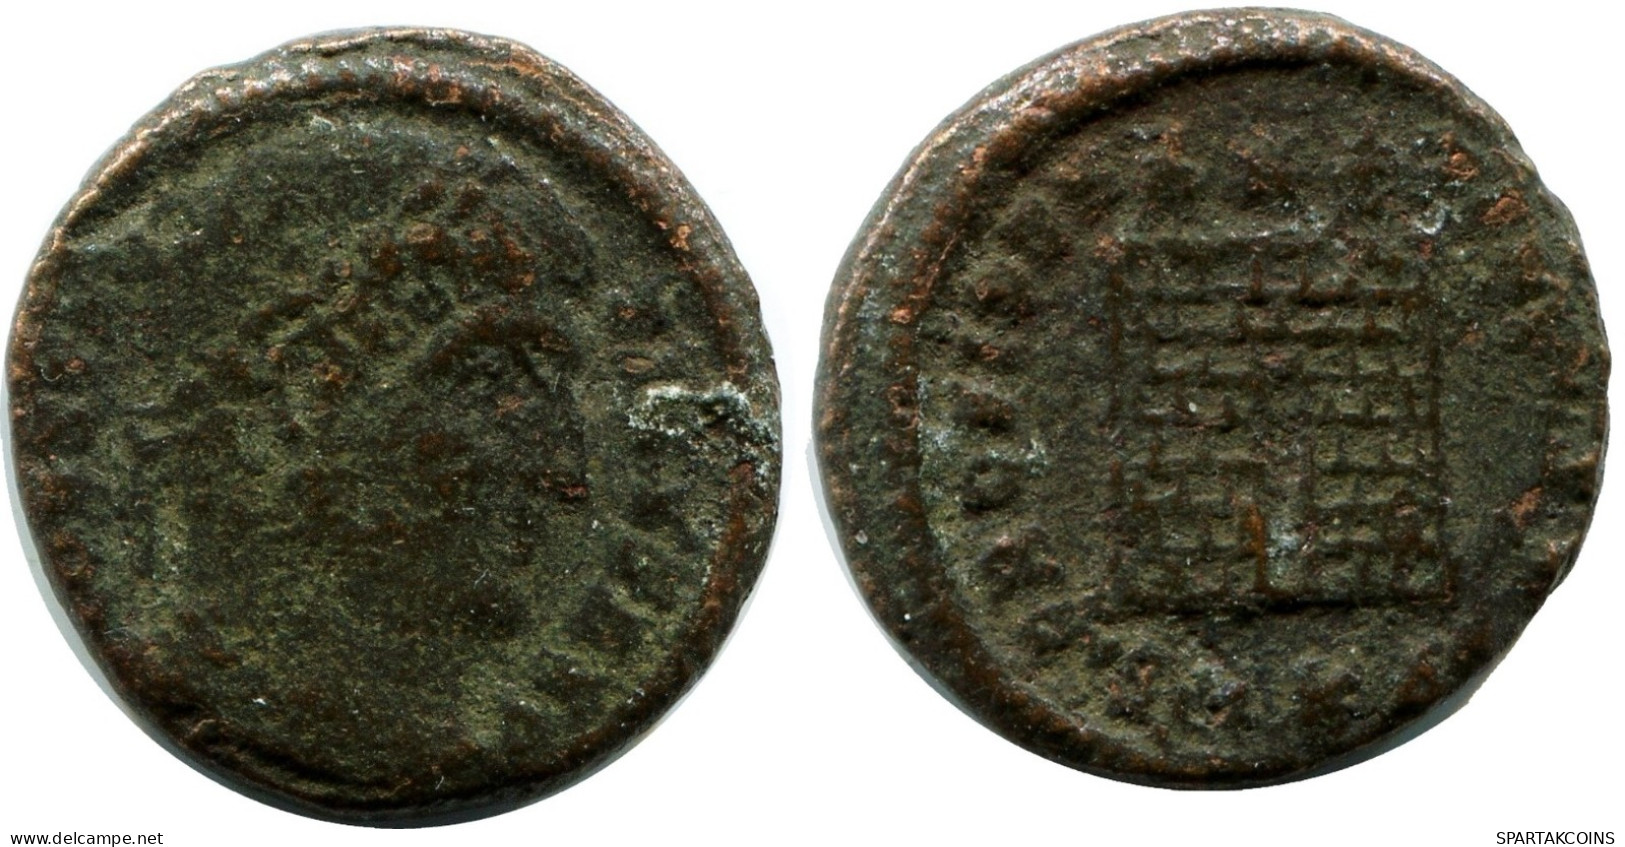 CONSTANTINE I MINTED IN CYZICUS FROM THE ROYAL ONTARIO MUSEUM #ANC11002.14.E.A - El Impero Christiano (307 / 363)